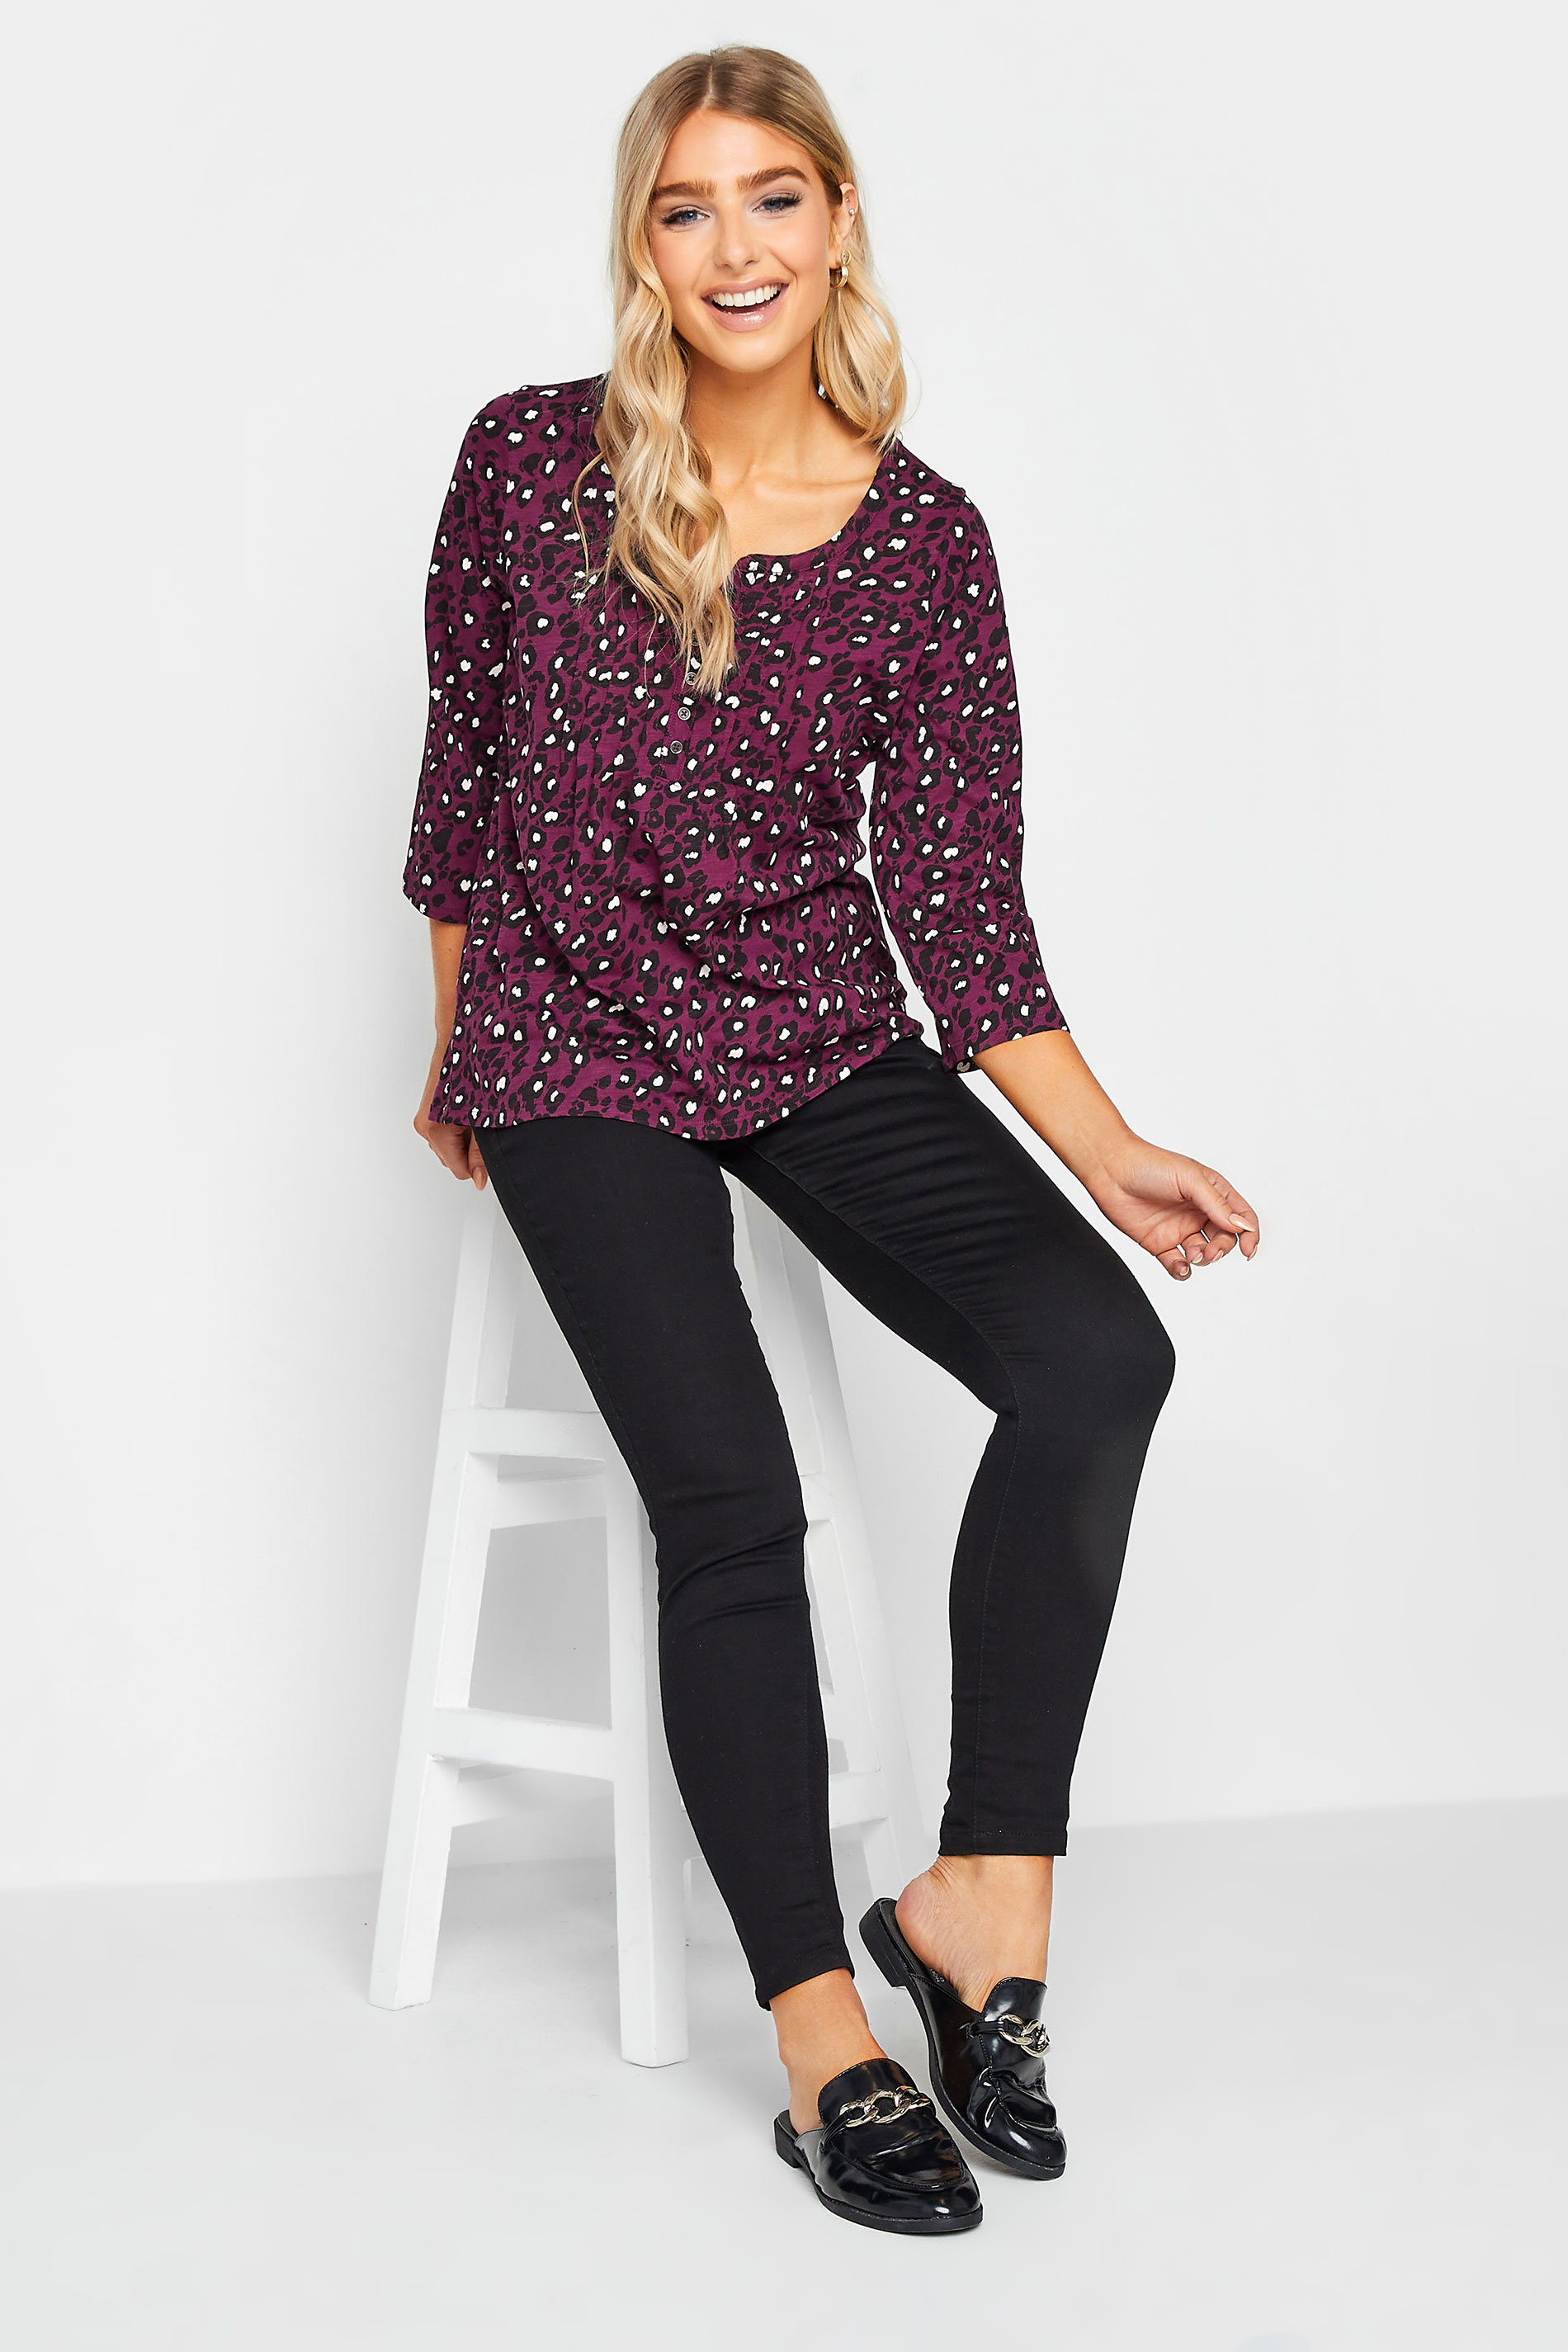 M&Co Berry Red Animal Print Henley Cotton Top | M&Co 2